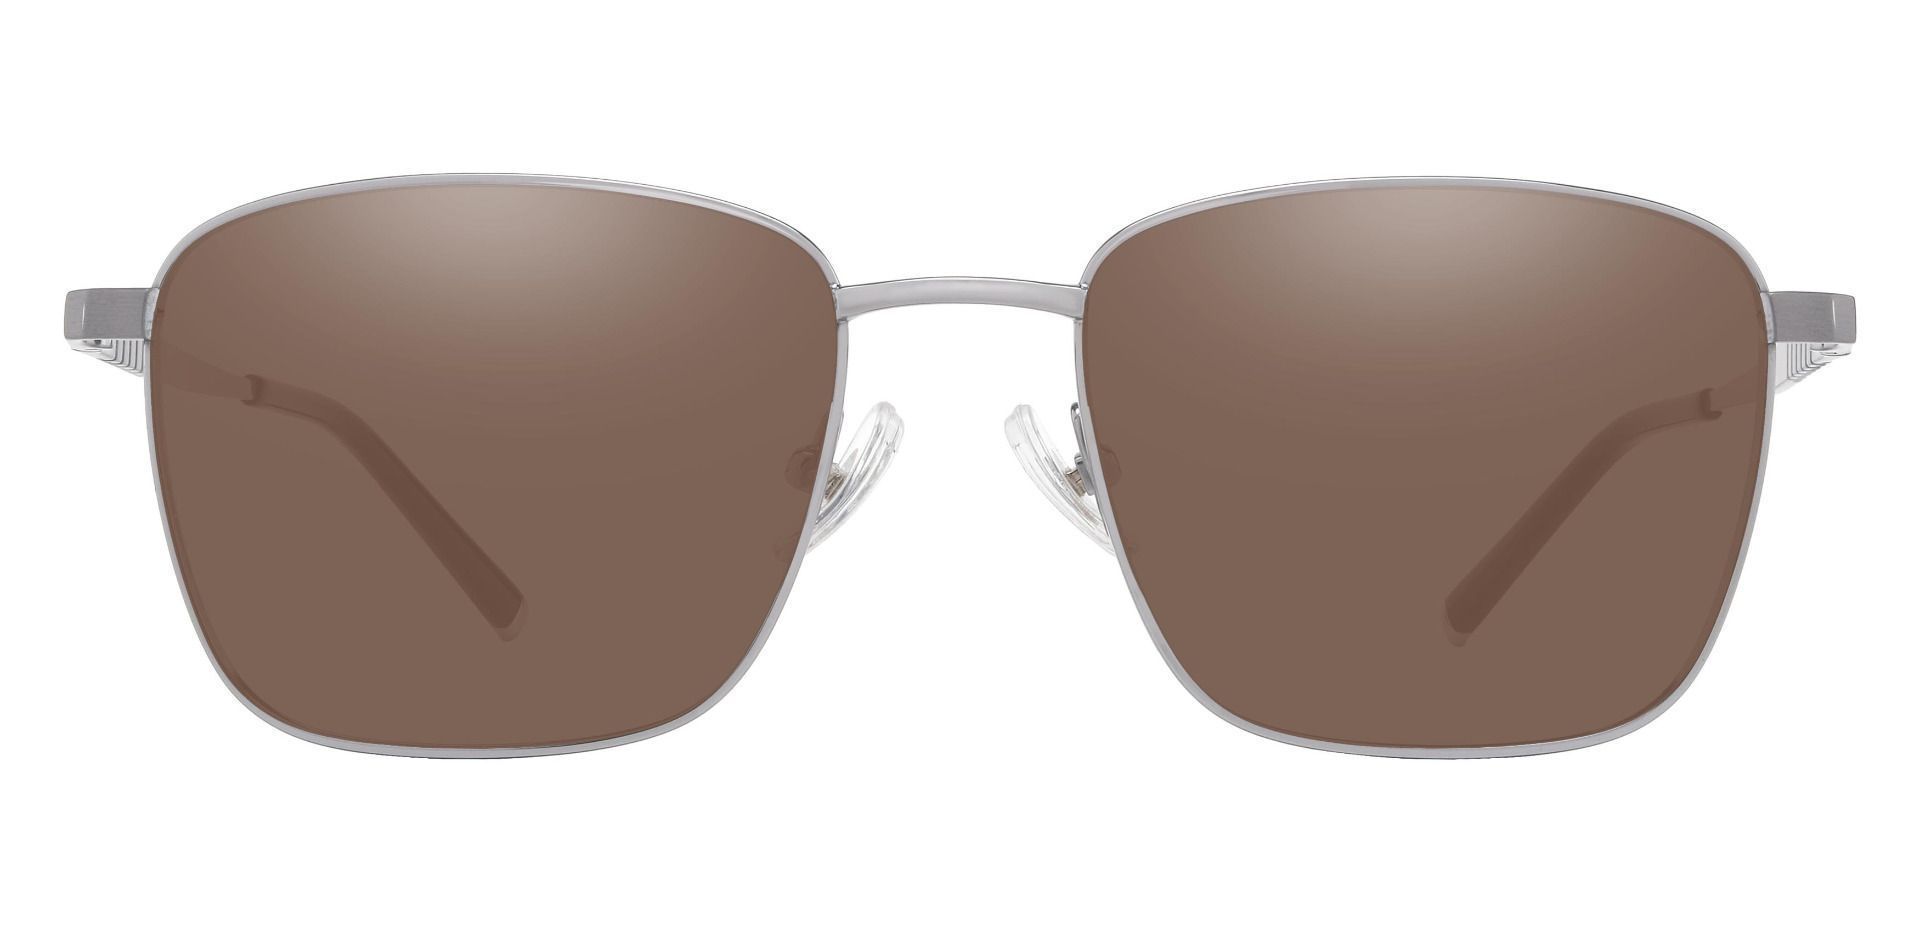 May Square Prescription Sunglasses - Silver Frame With Brown Lenses